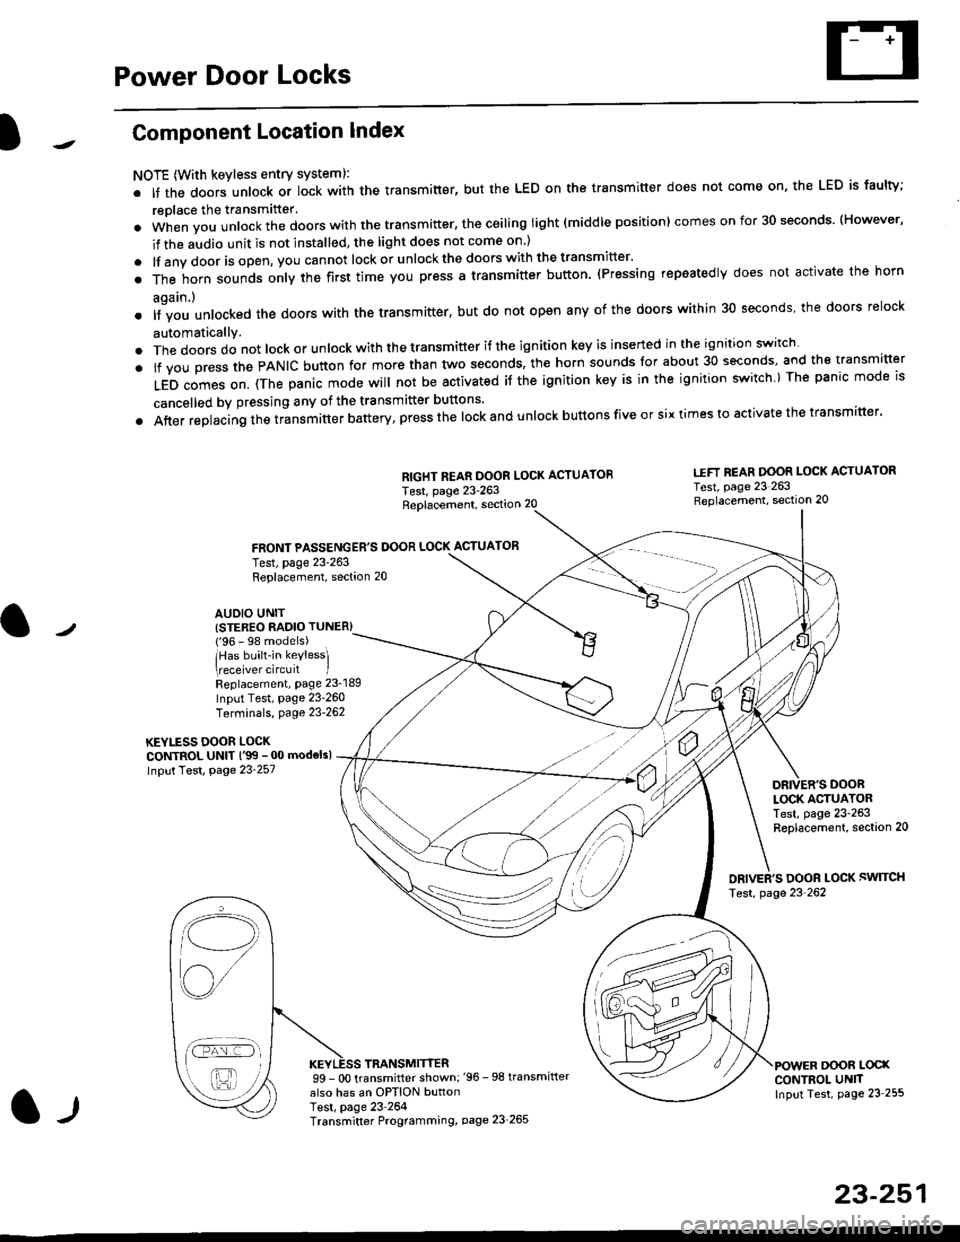 HONDA CIVIC 1996 6.G Workshop Manual Power Door Locks
Component Location Index
NOTE (With keyless entry systeml:
. It the doors unlock or lock with the transmitter, but the LED on the transmitter does not come on, the LED is faulty;
repl